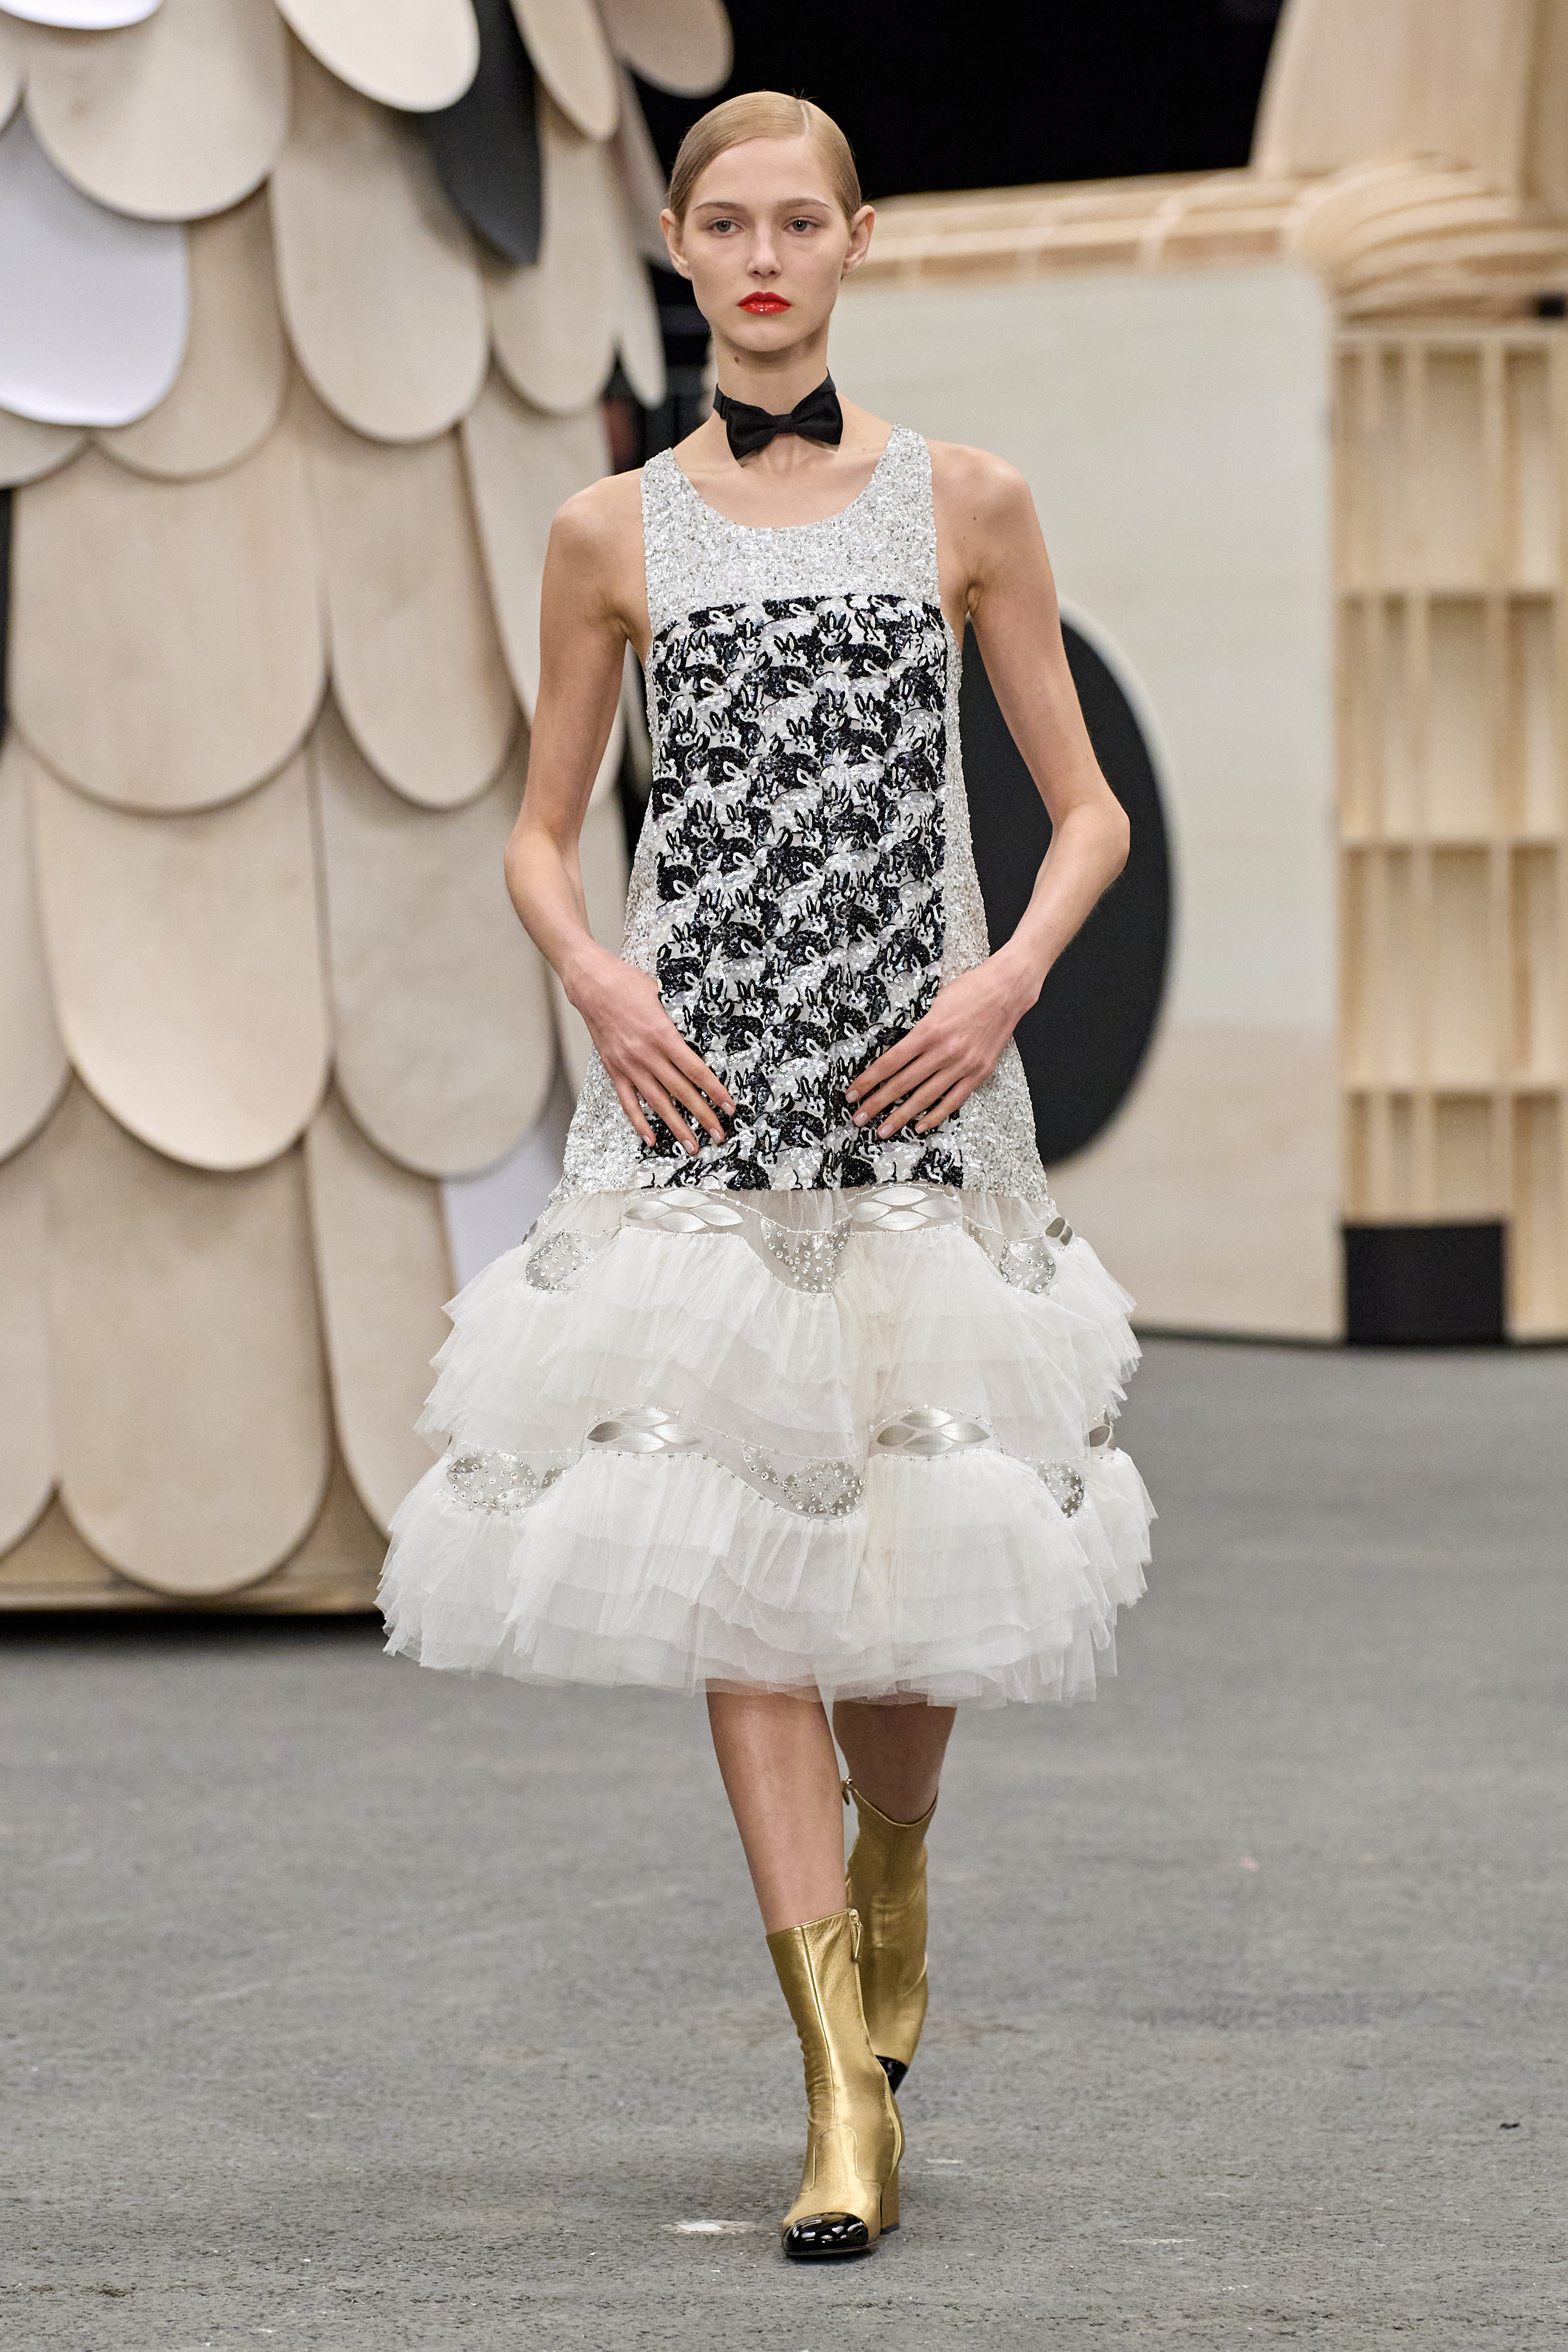 Chanel Puts Its Exemplary Craftsmanship on Parade for Spring 2023 Couture